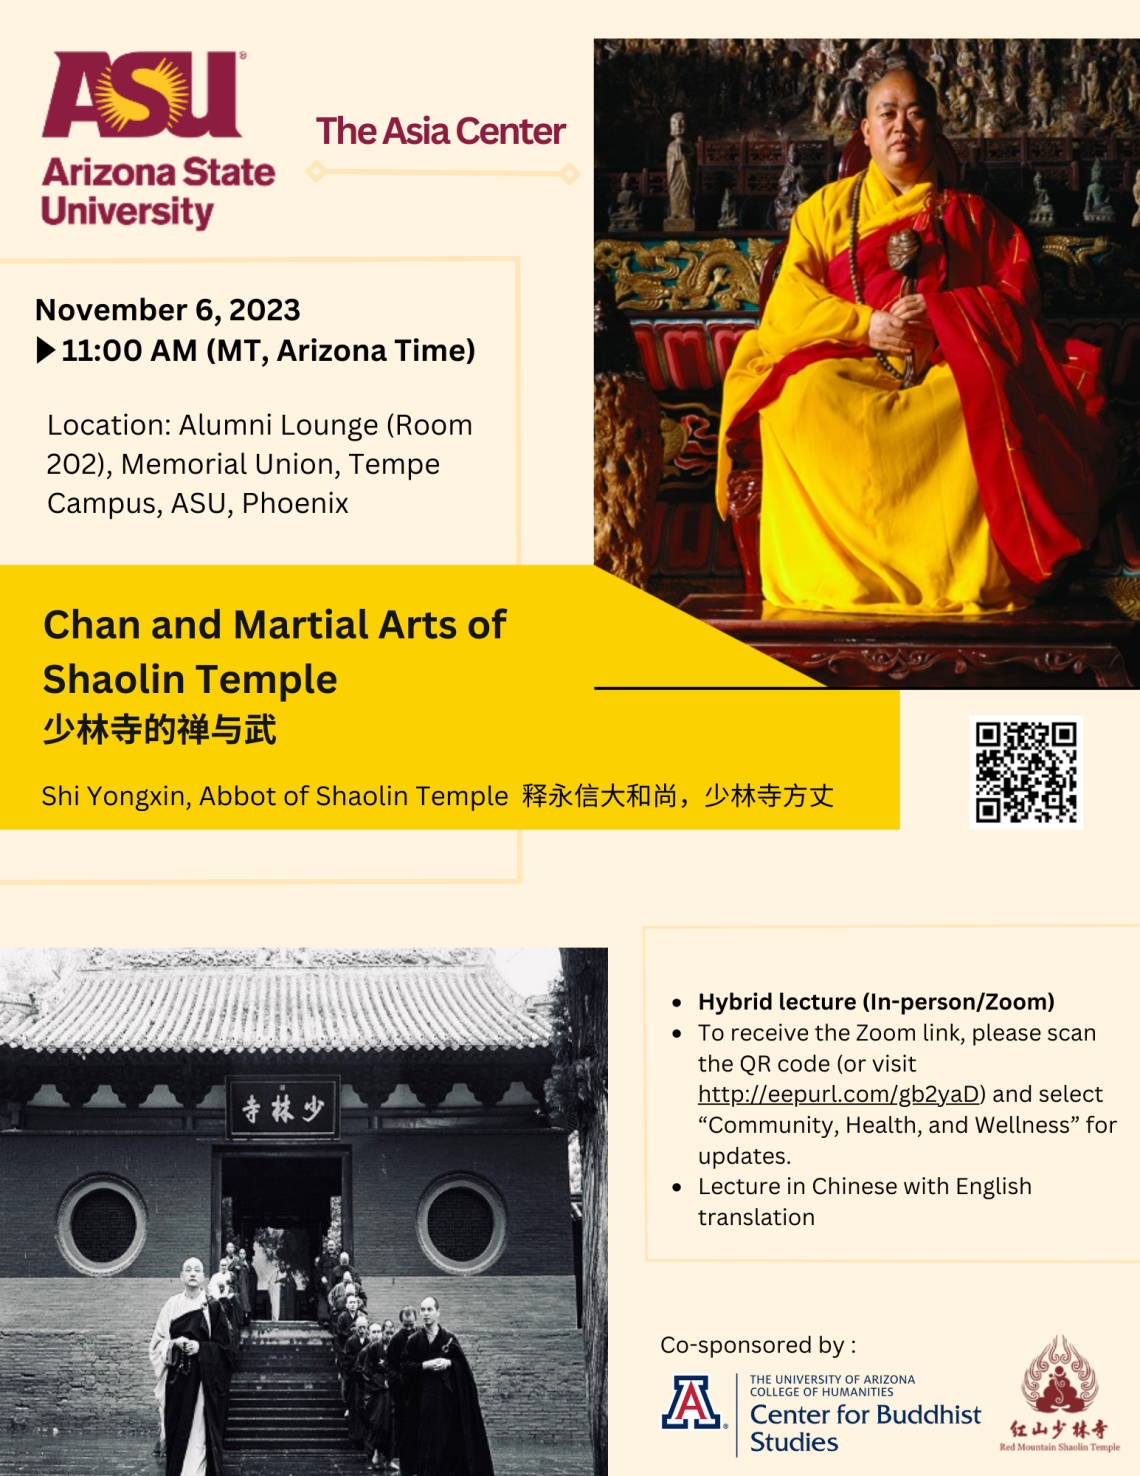 Lecture by the Shaolin Temple Abbot Shi Yongxin on Nov. 6 | Center 